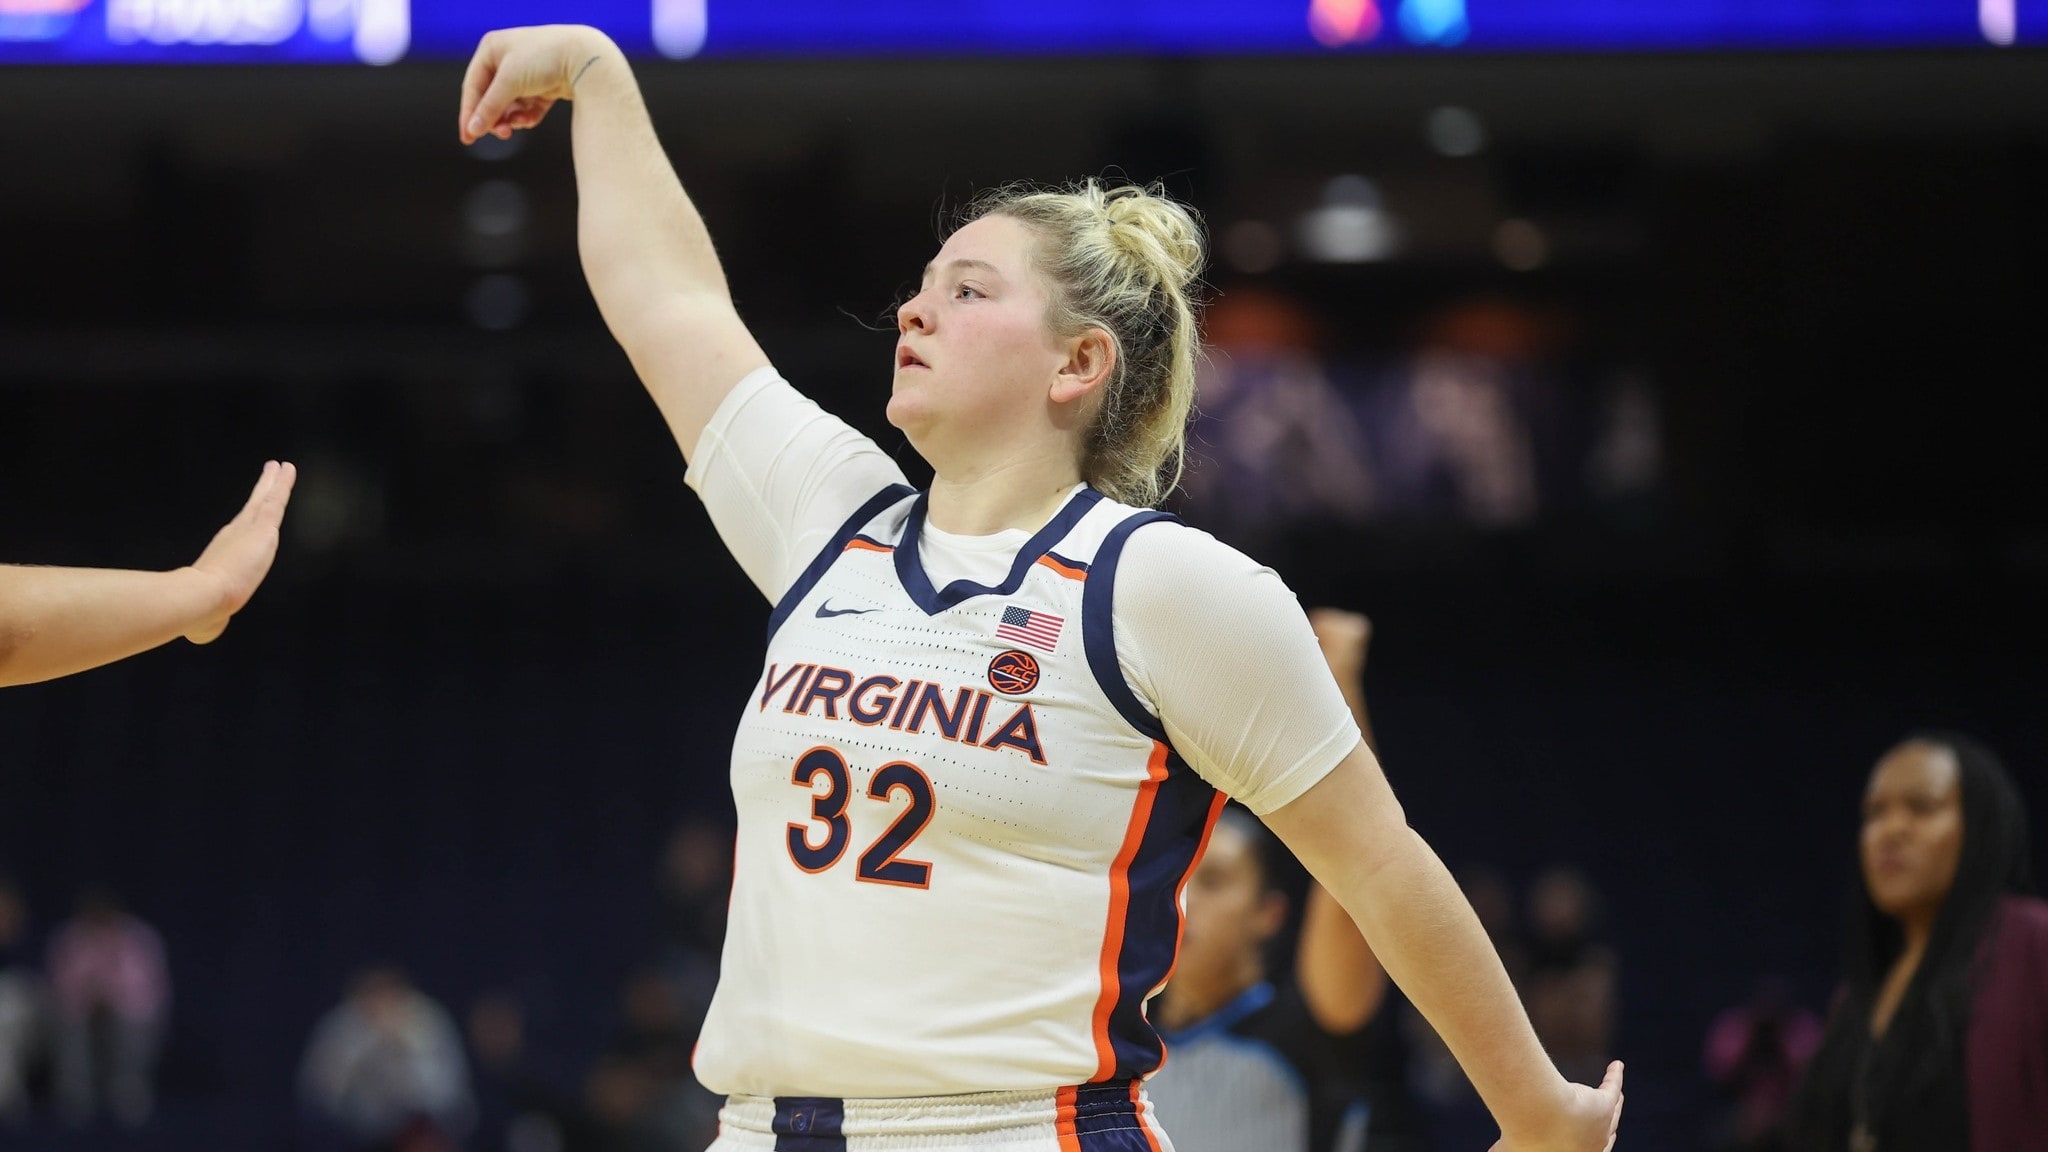 Cady Pauley shoots a three-pointer during the Virginia women's basketball game against Pitt Johnstown.